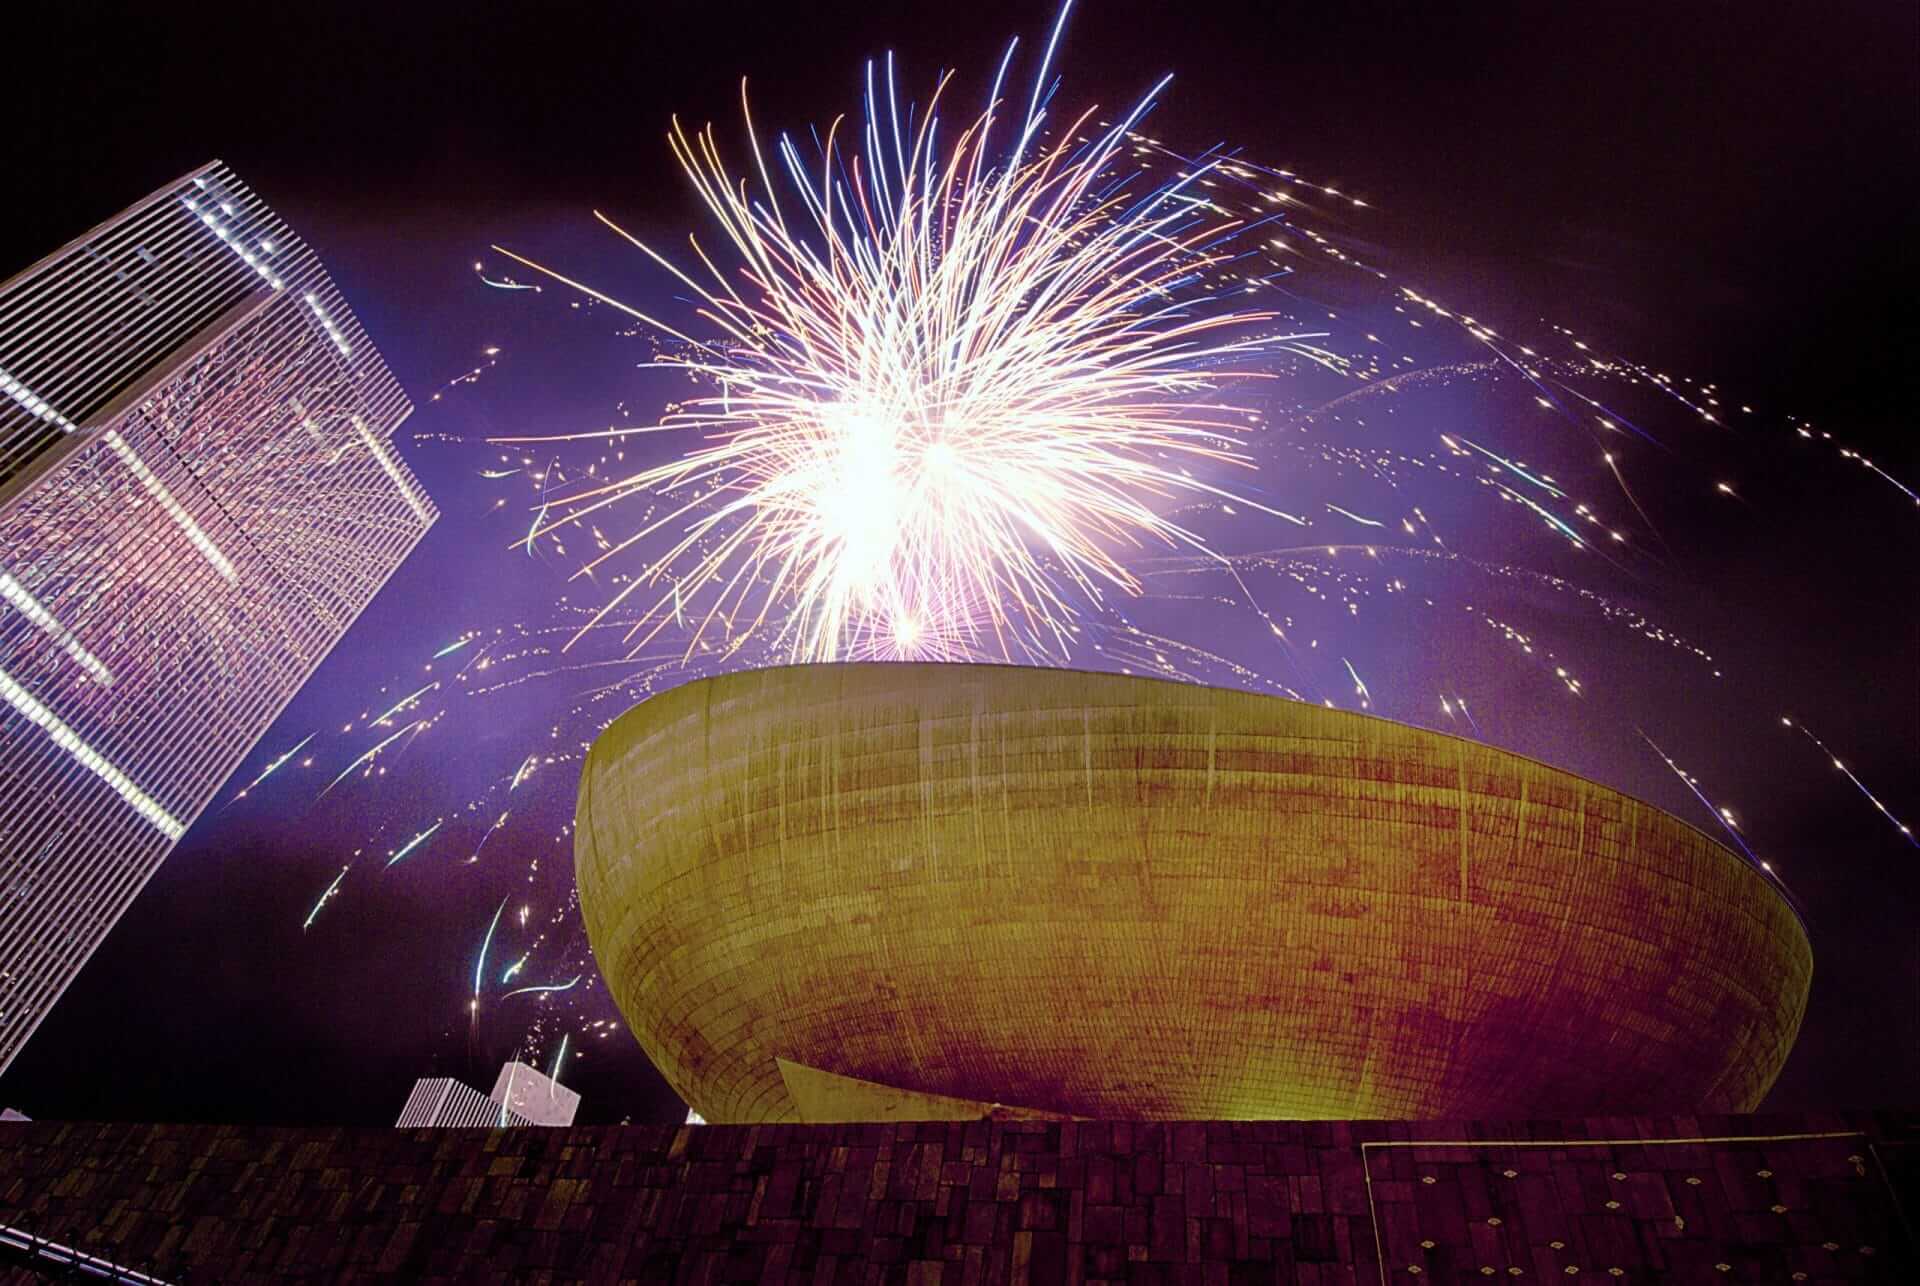 fireworks over The Egg Performing Arts Center at the Empire State Plaza in Albany